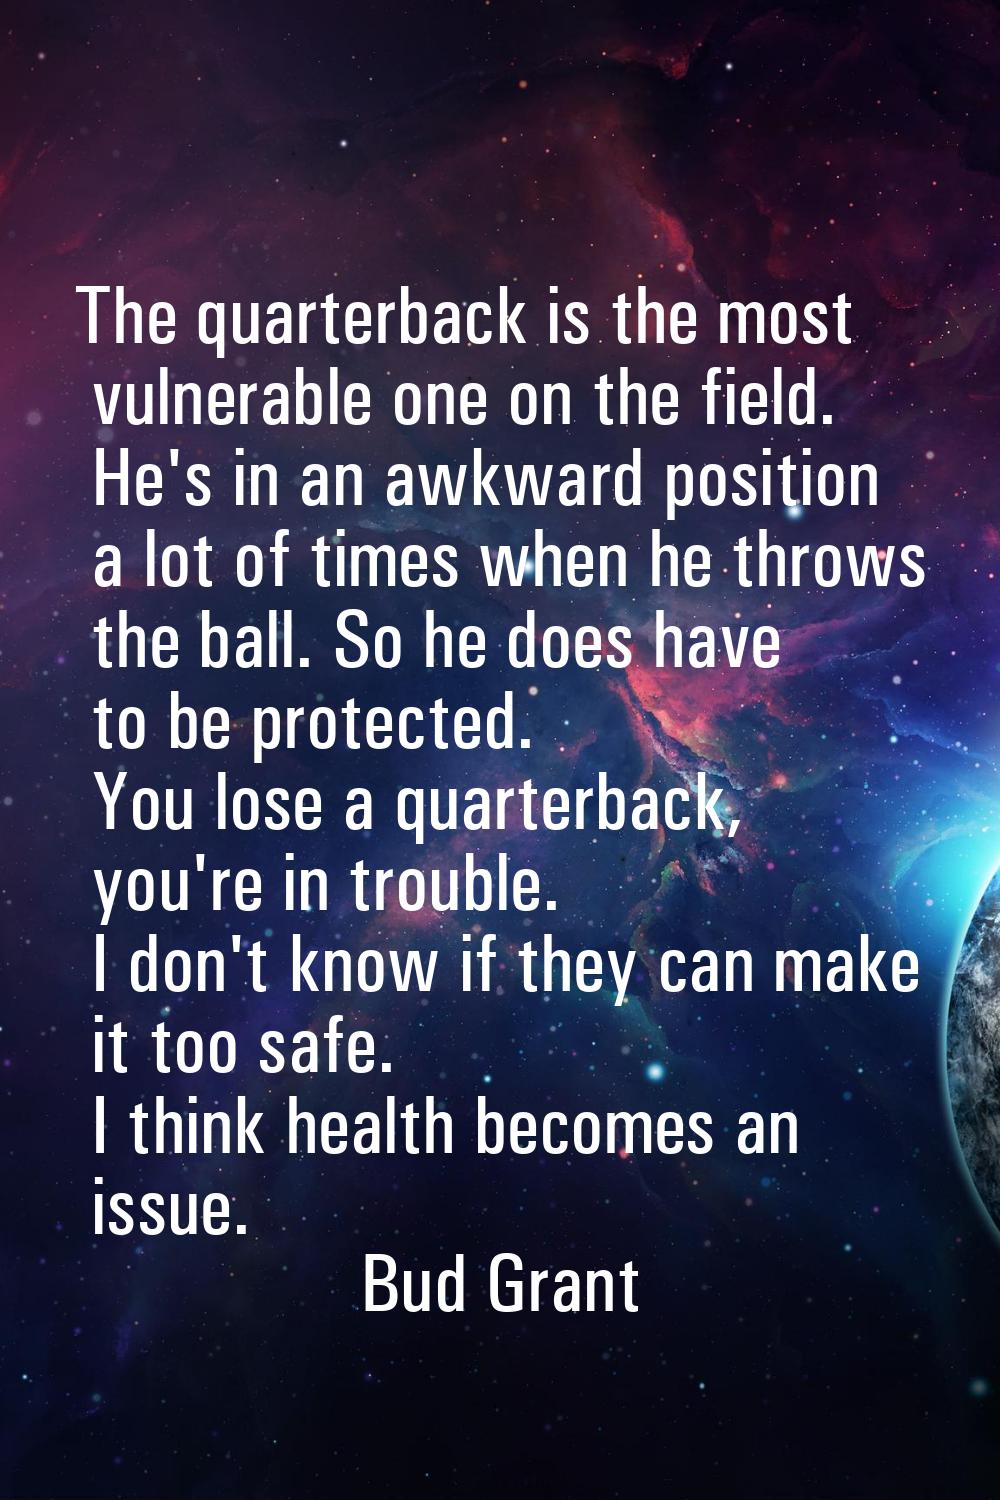 The quarterback is the most vulnerable one on the field. He's in an awkward position a lot of times